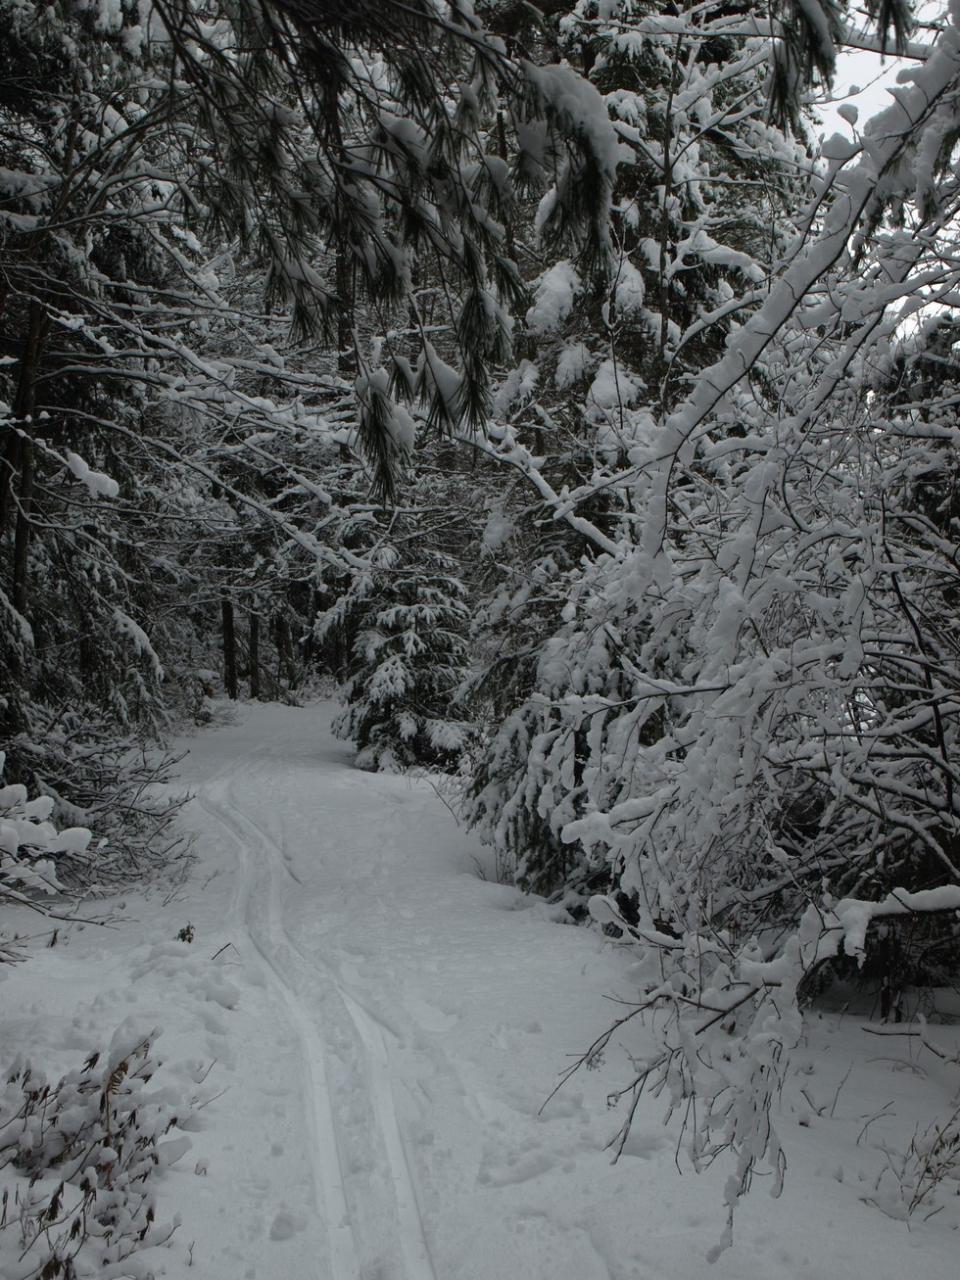 A wonderful trail for backcountry skiing or snowshoeing.